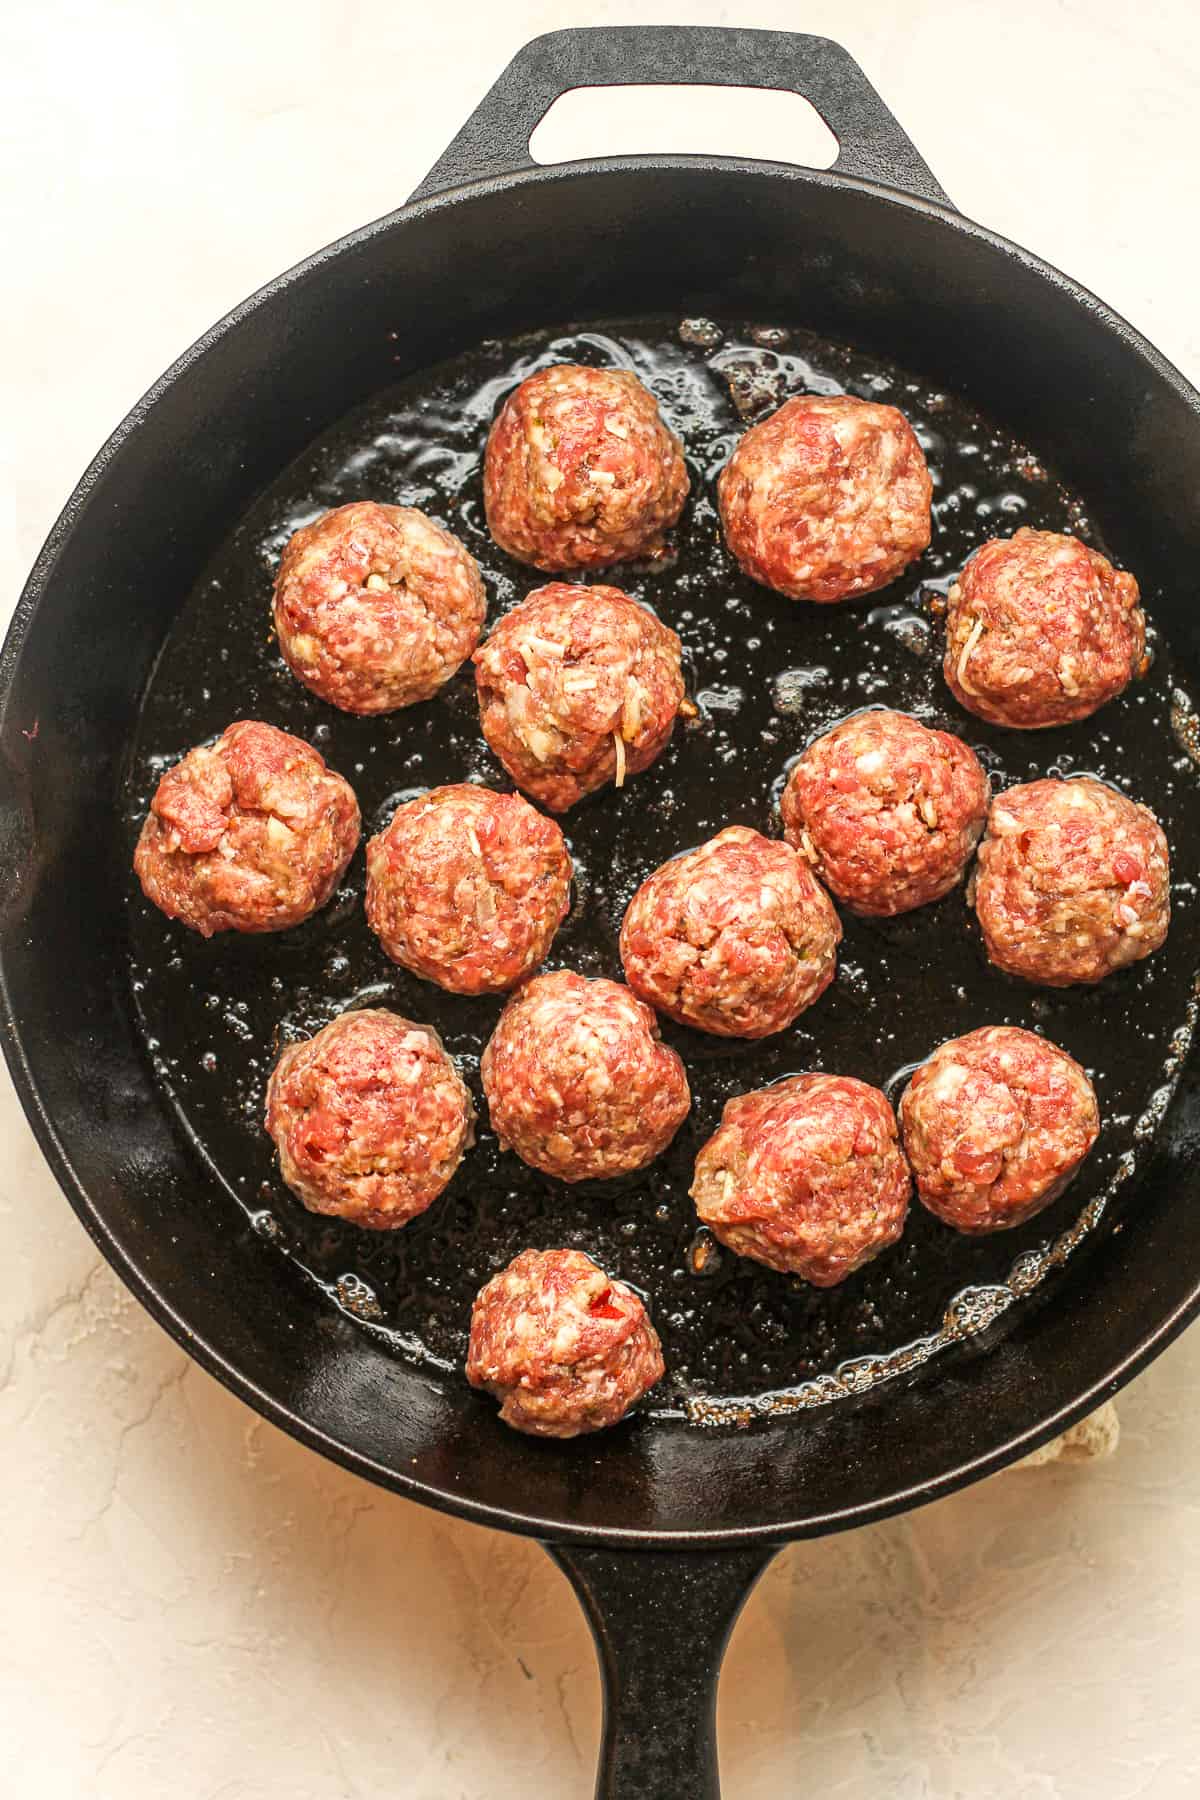 A large skillet of the raw meatballs.